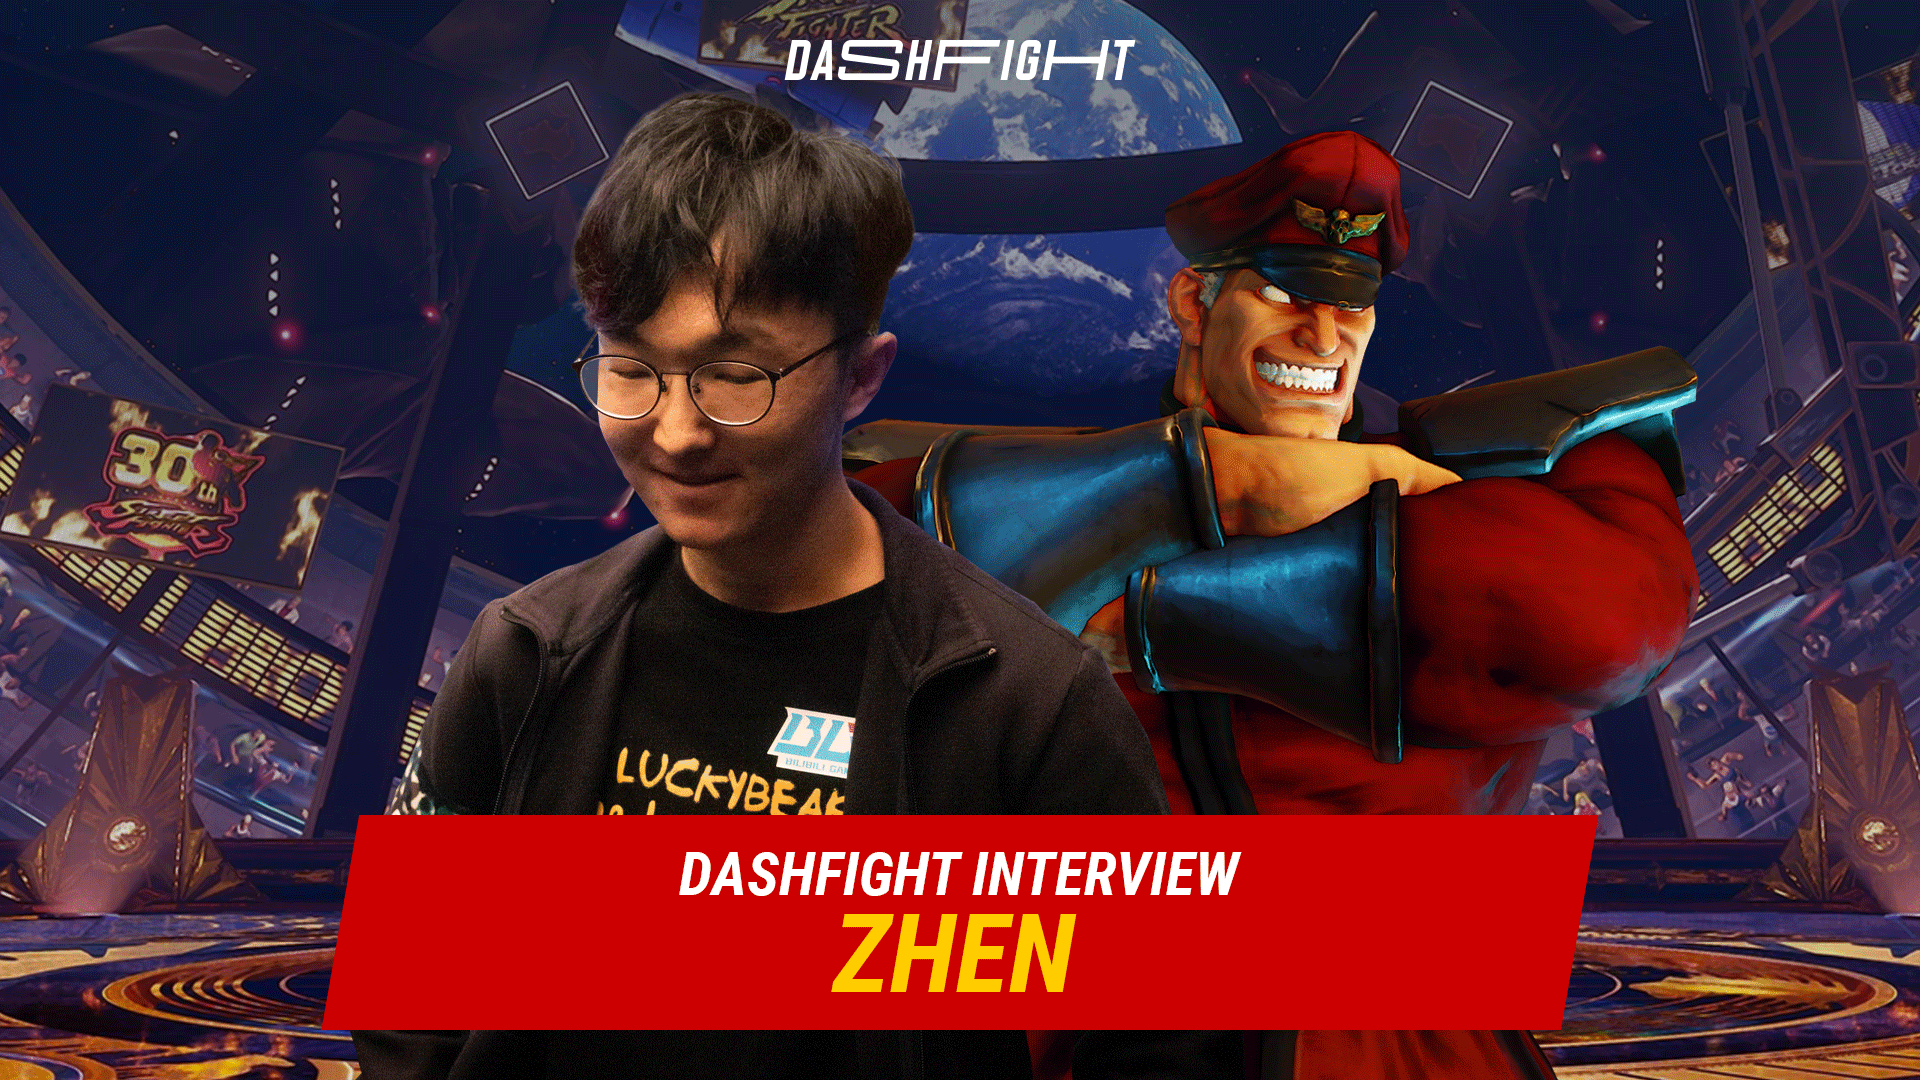 I Just Wanted to Travel With My Friends - Zhen Speaks to DashFight